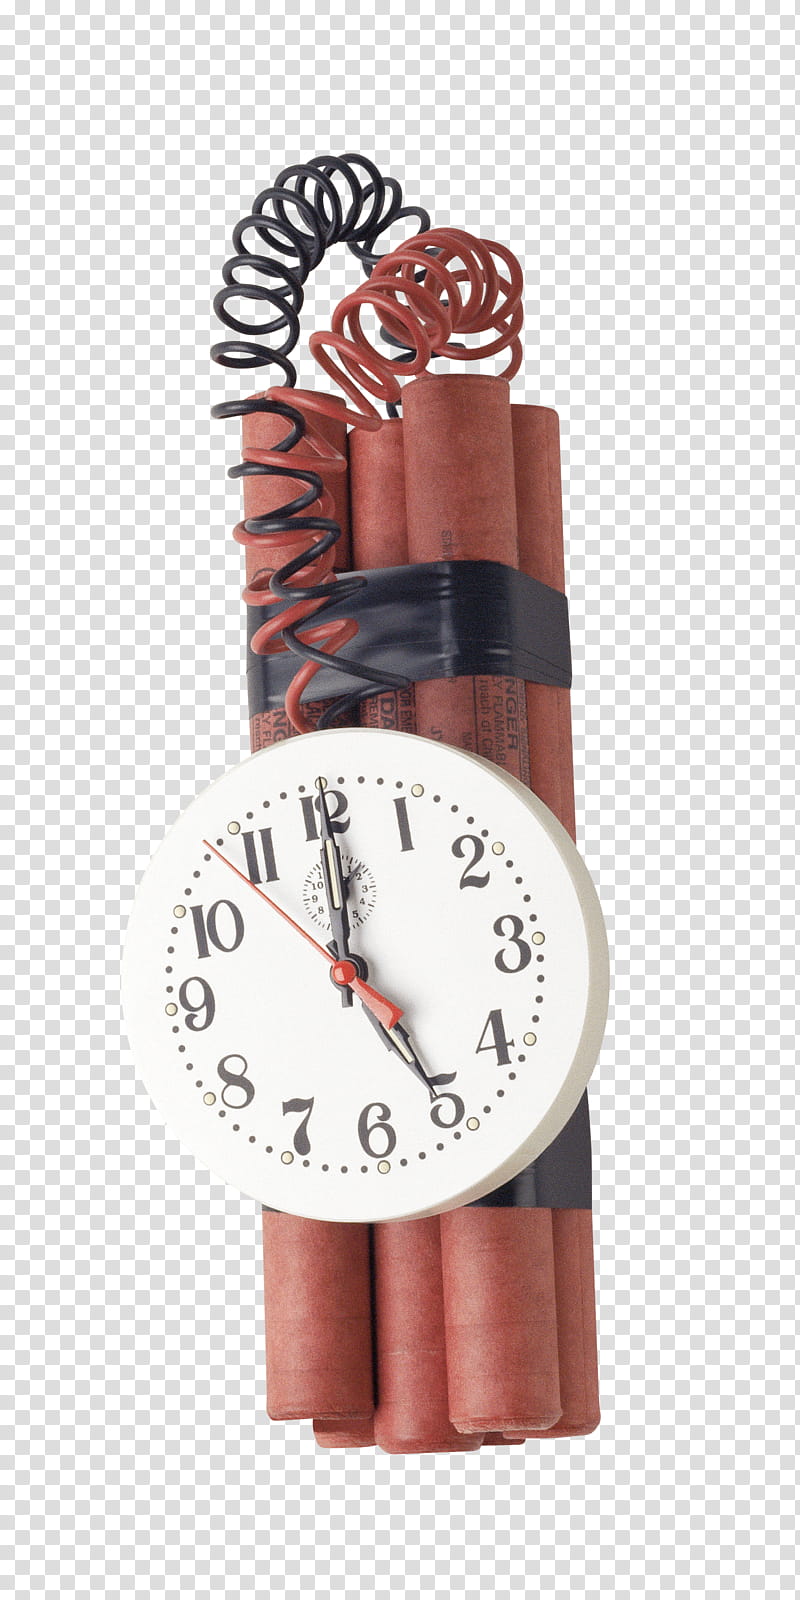 TimeBomb Free , timed dynamite transparent background PNG clipart